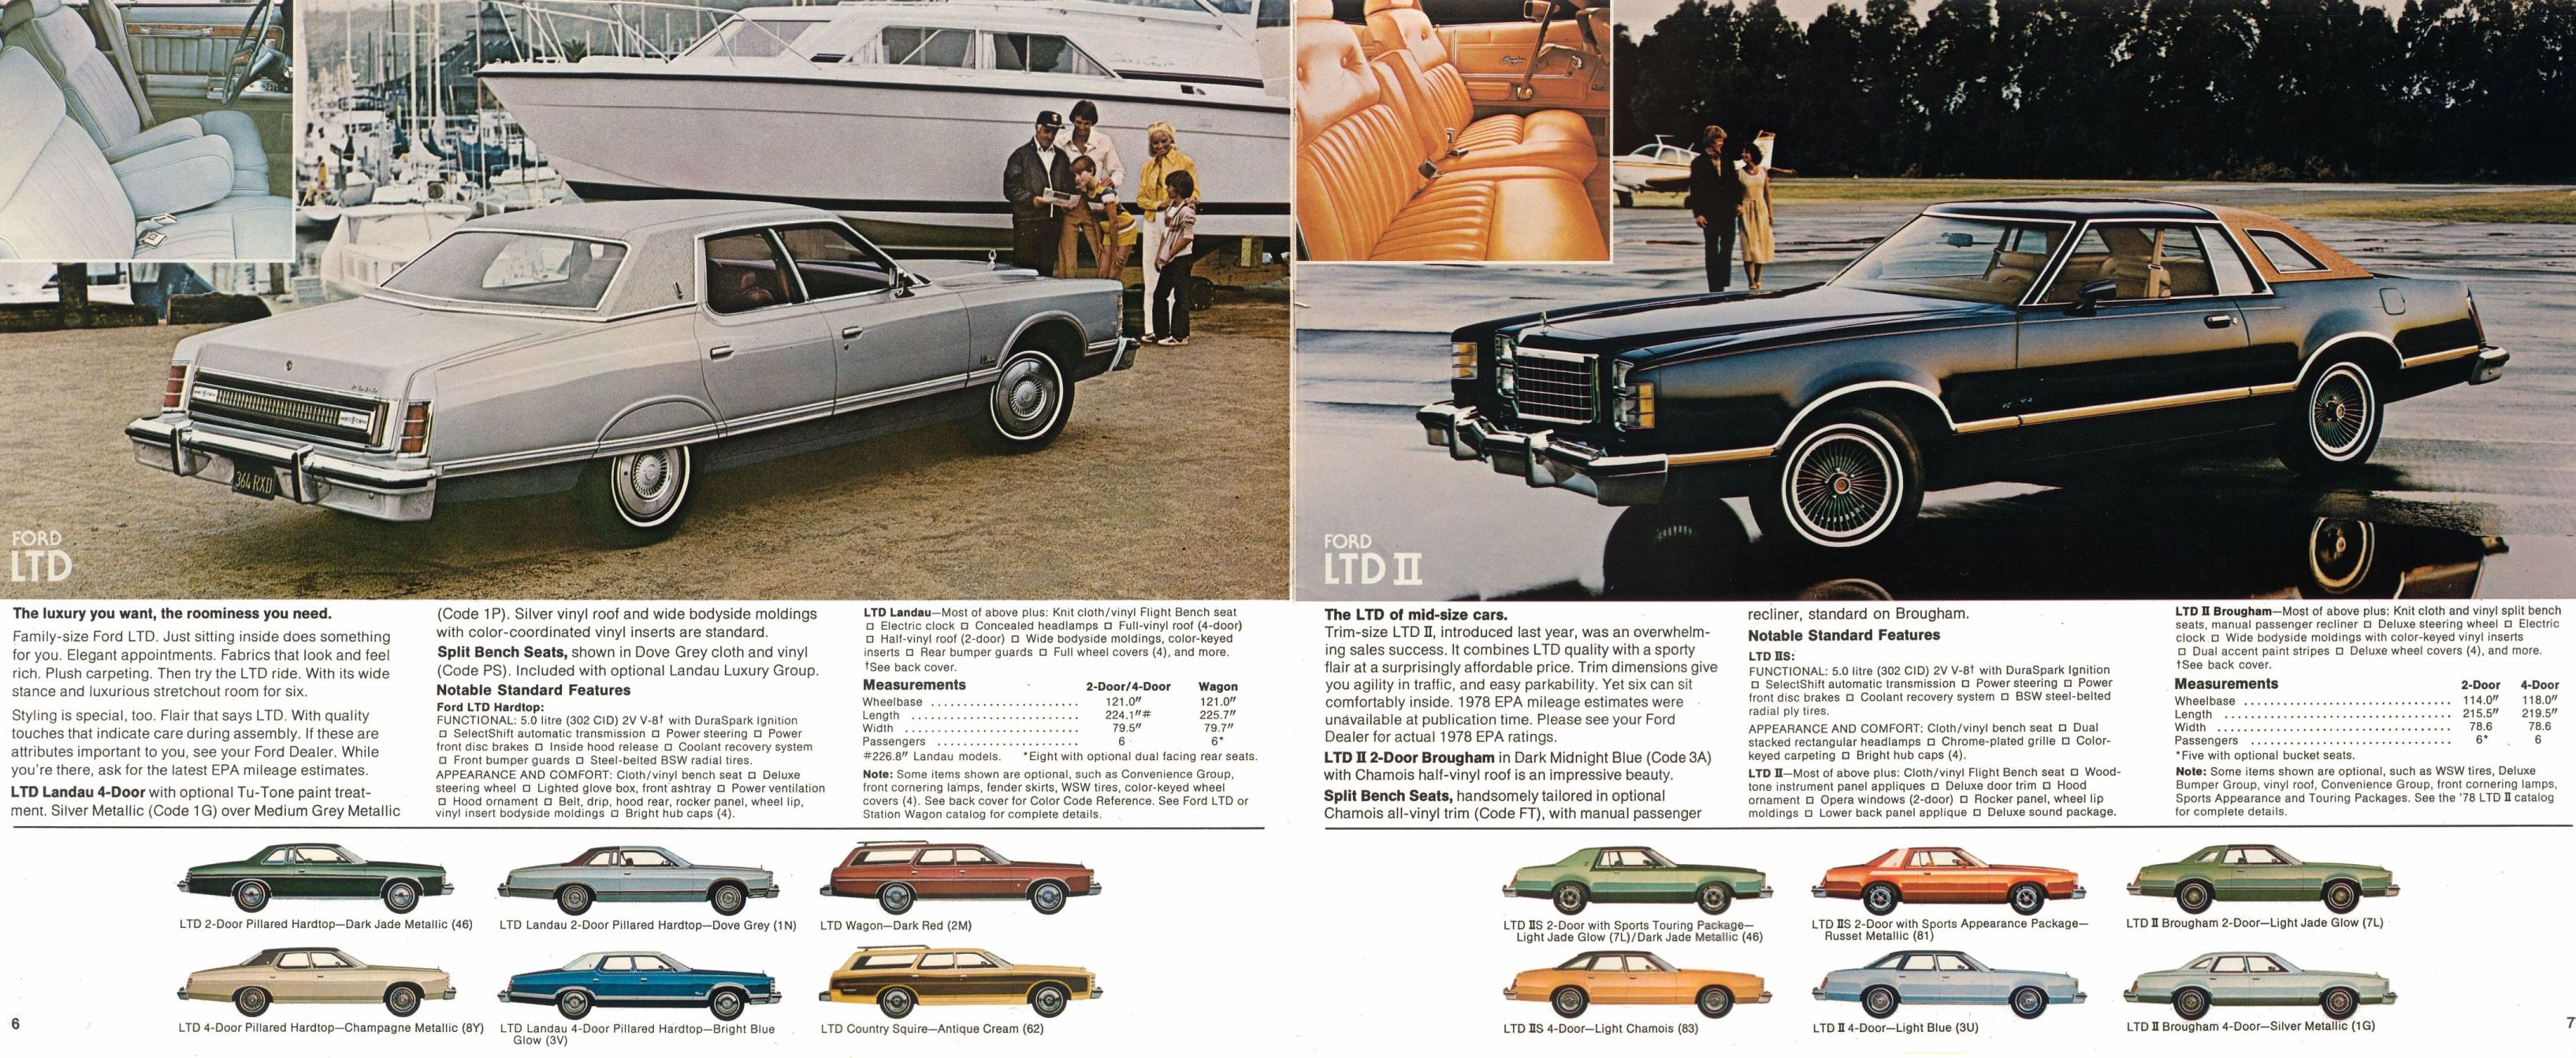 1978_Ford_Foldout-06-07